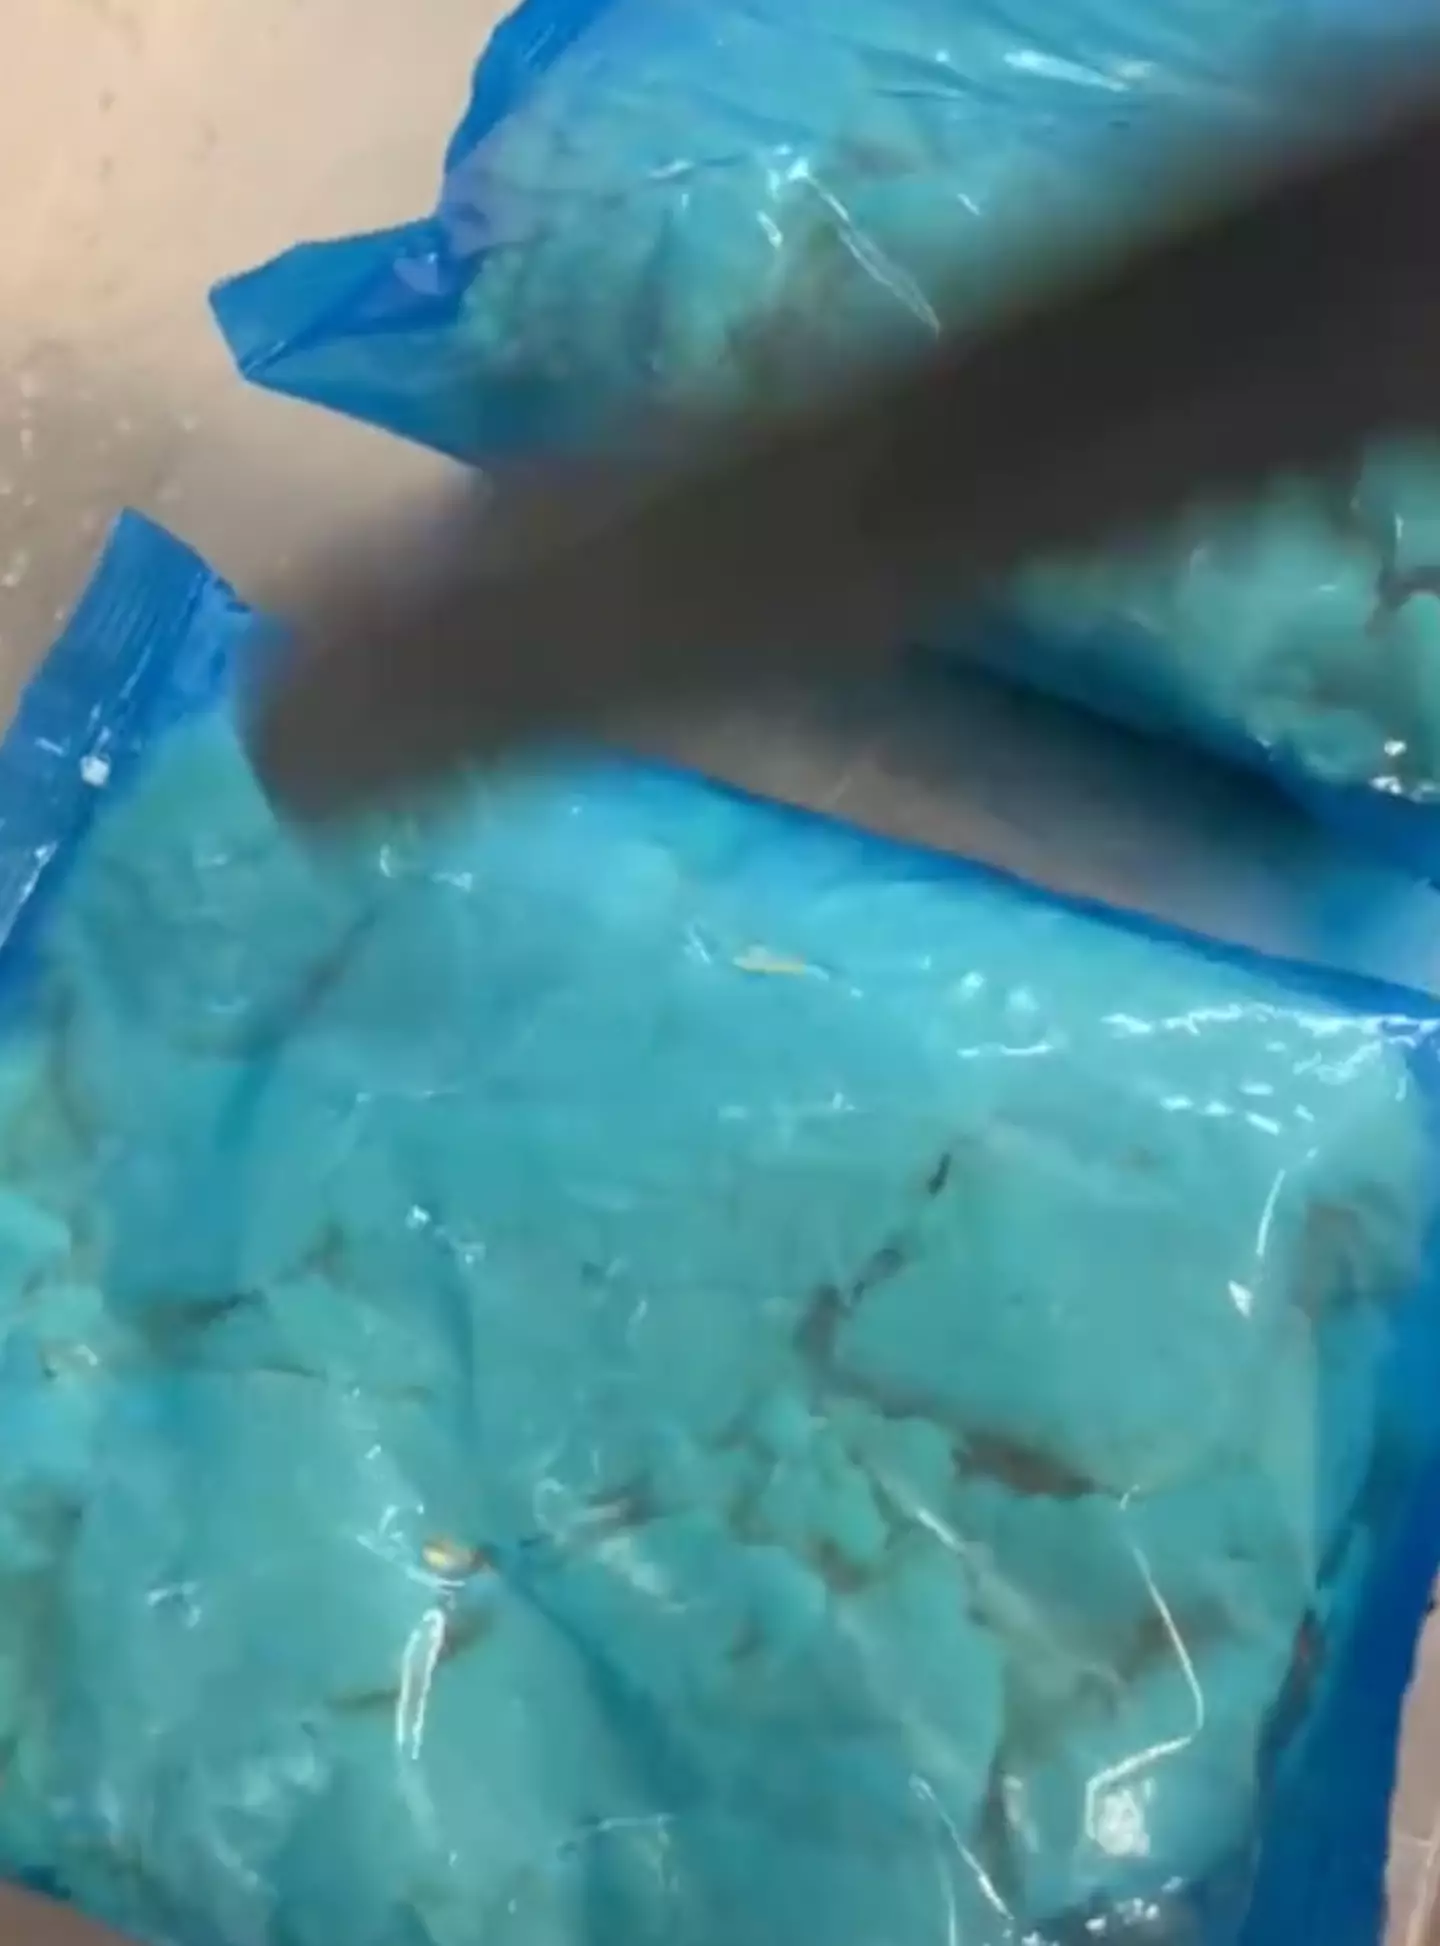 The eggs arrive in a blue plastic bag.